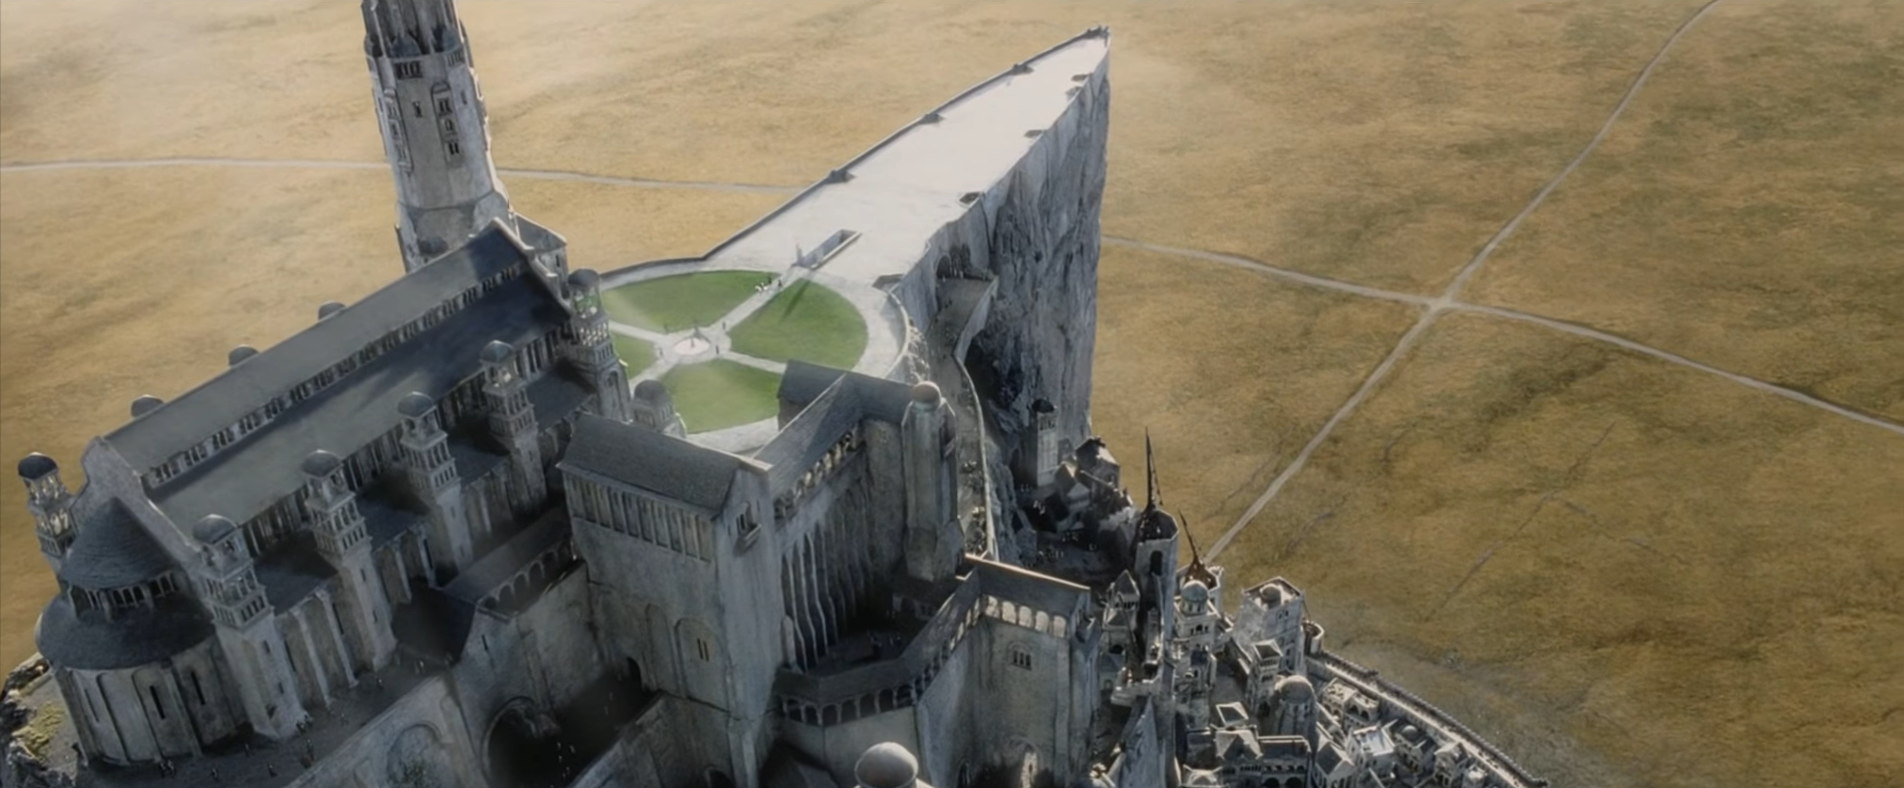 Minas Tirith, and its different levels tunnel through the cliff